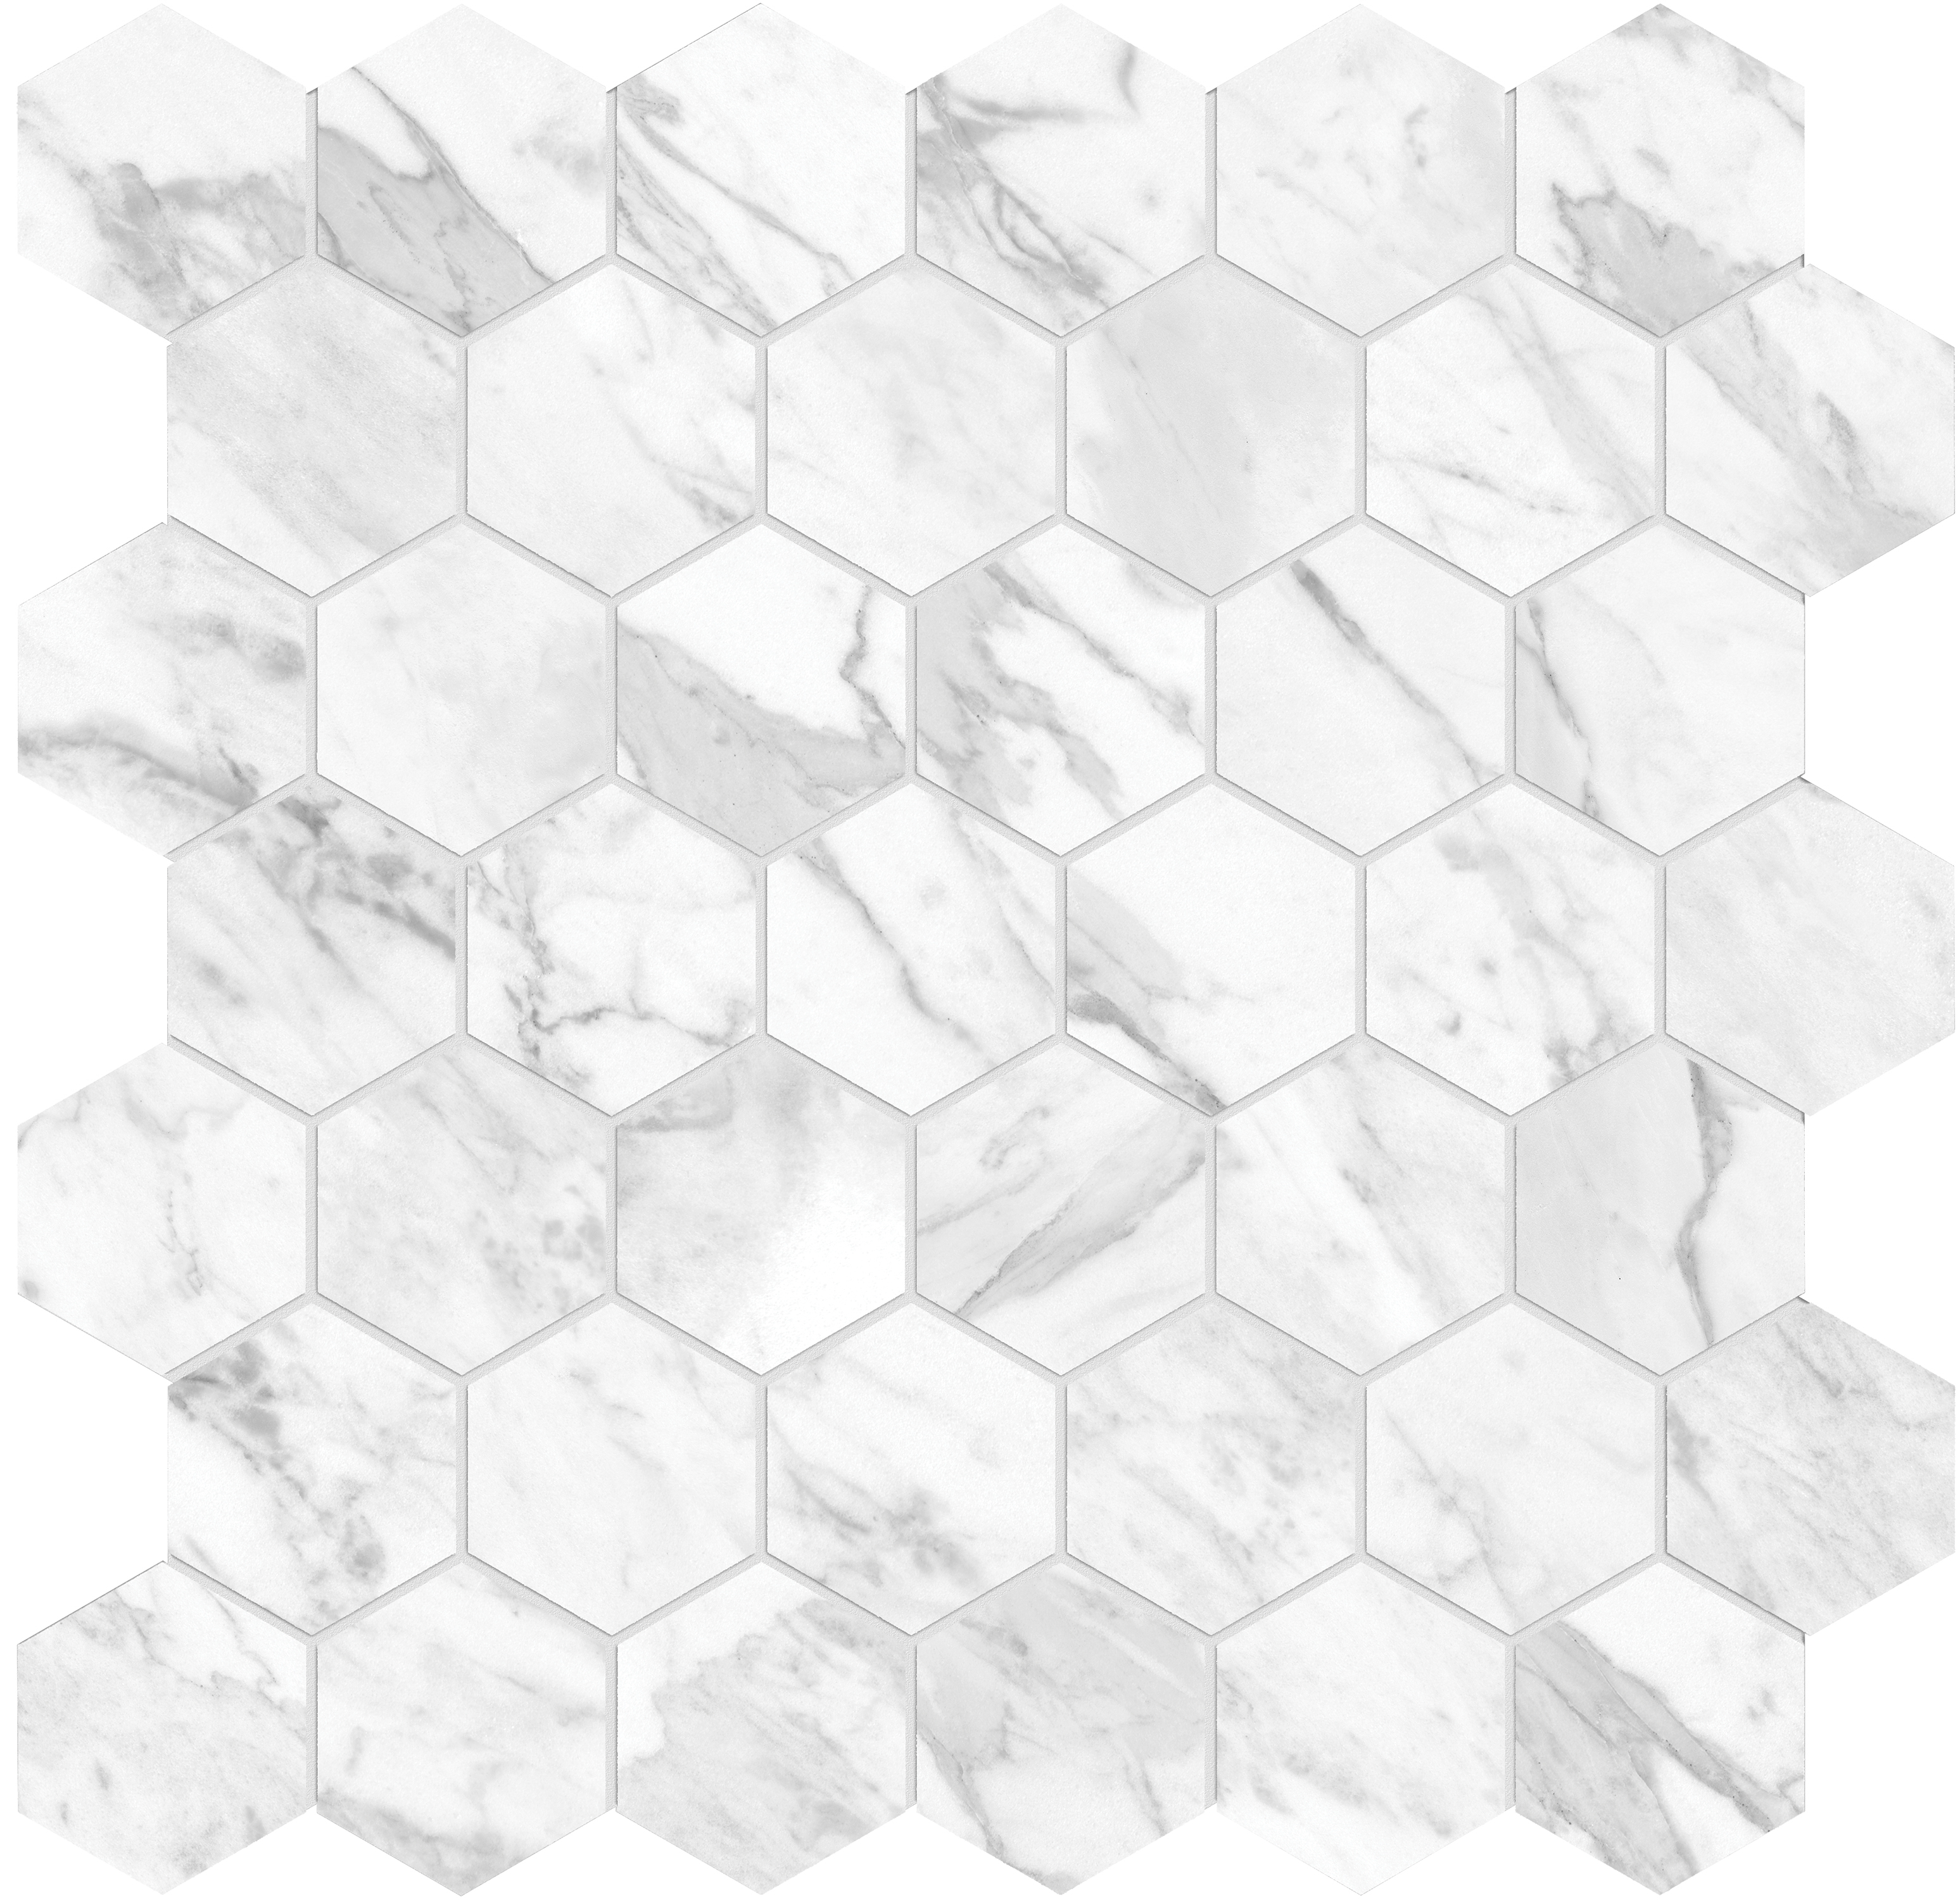 statuarietto hexagon 2-inch pattern glazed porcelain mosaic from la marca anatolia collection distributed by surface group international honed finish straight edge edge mesh shape